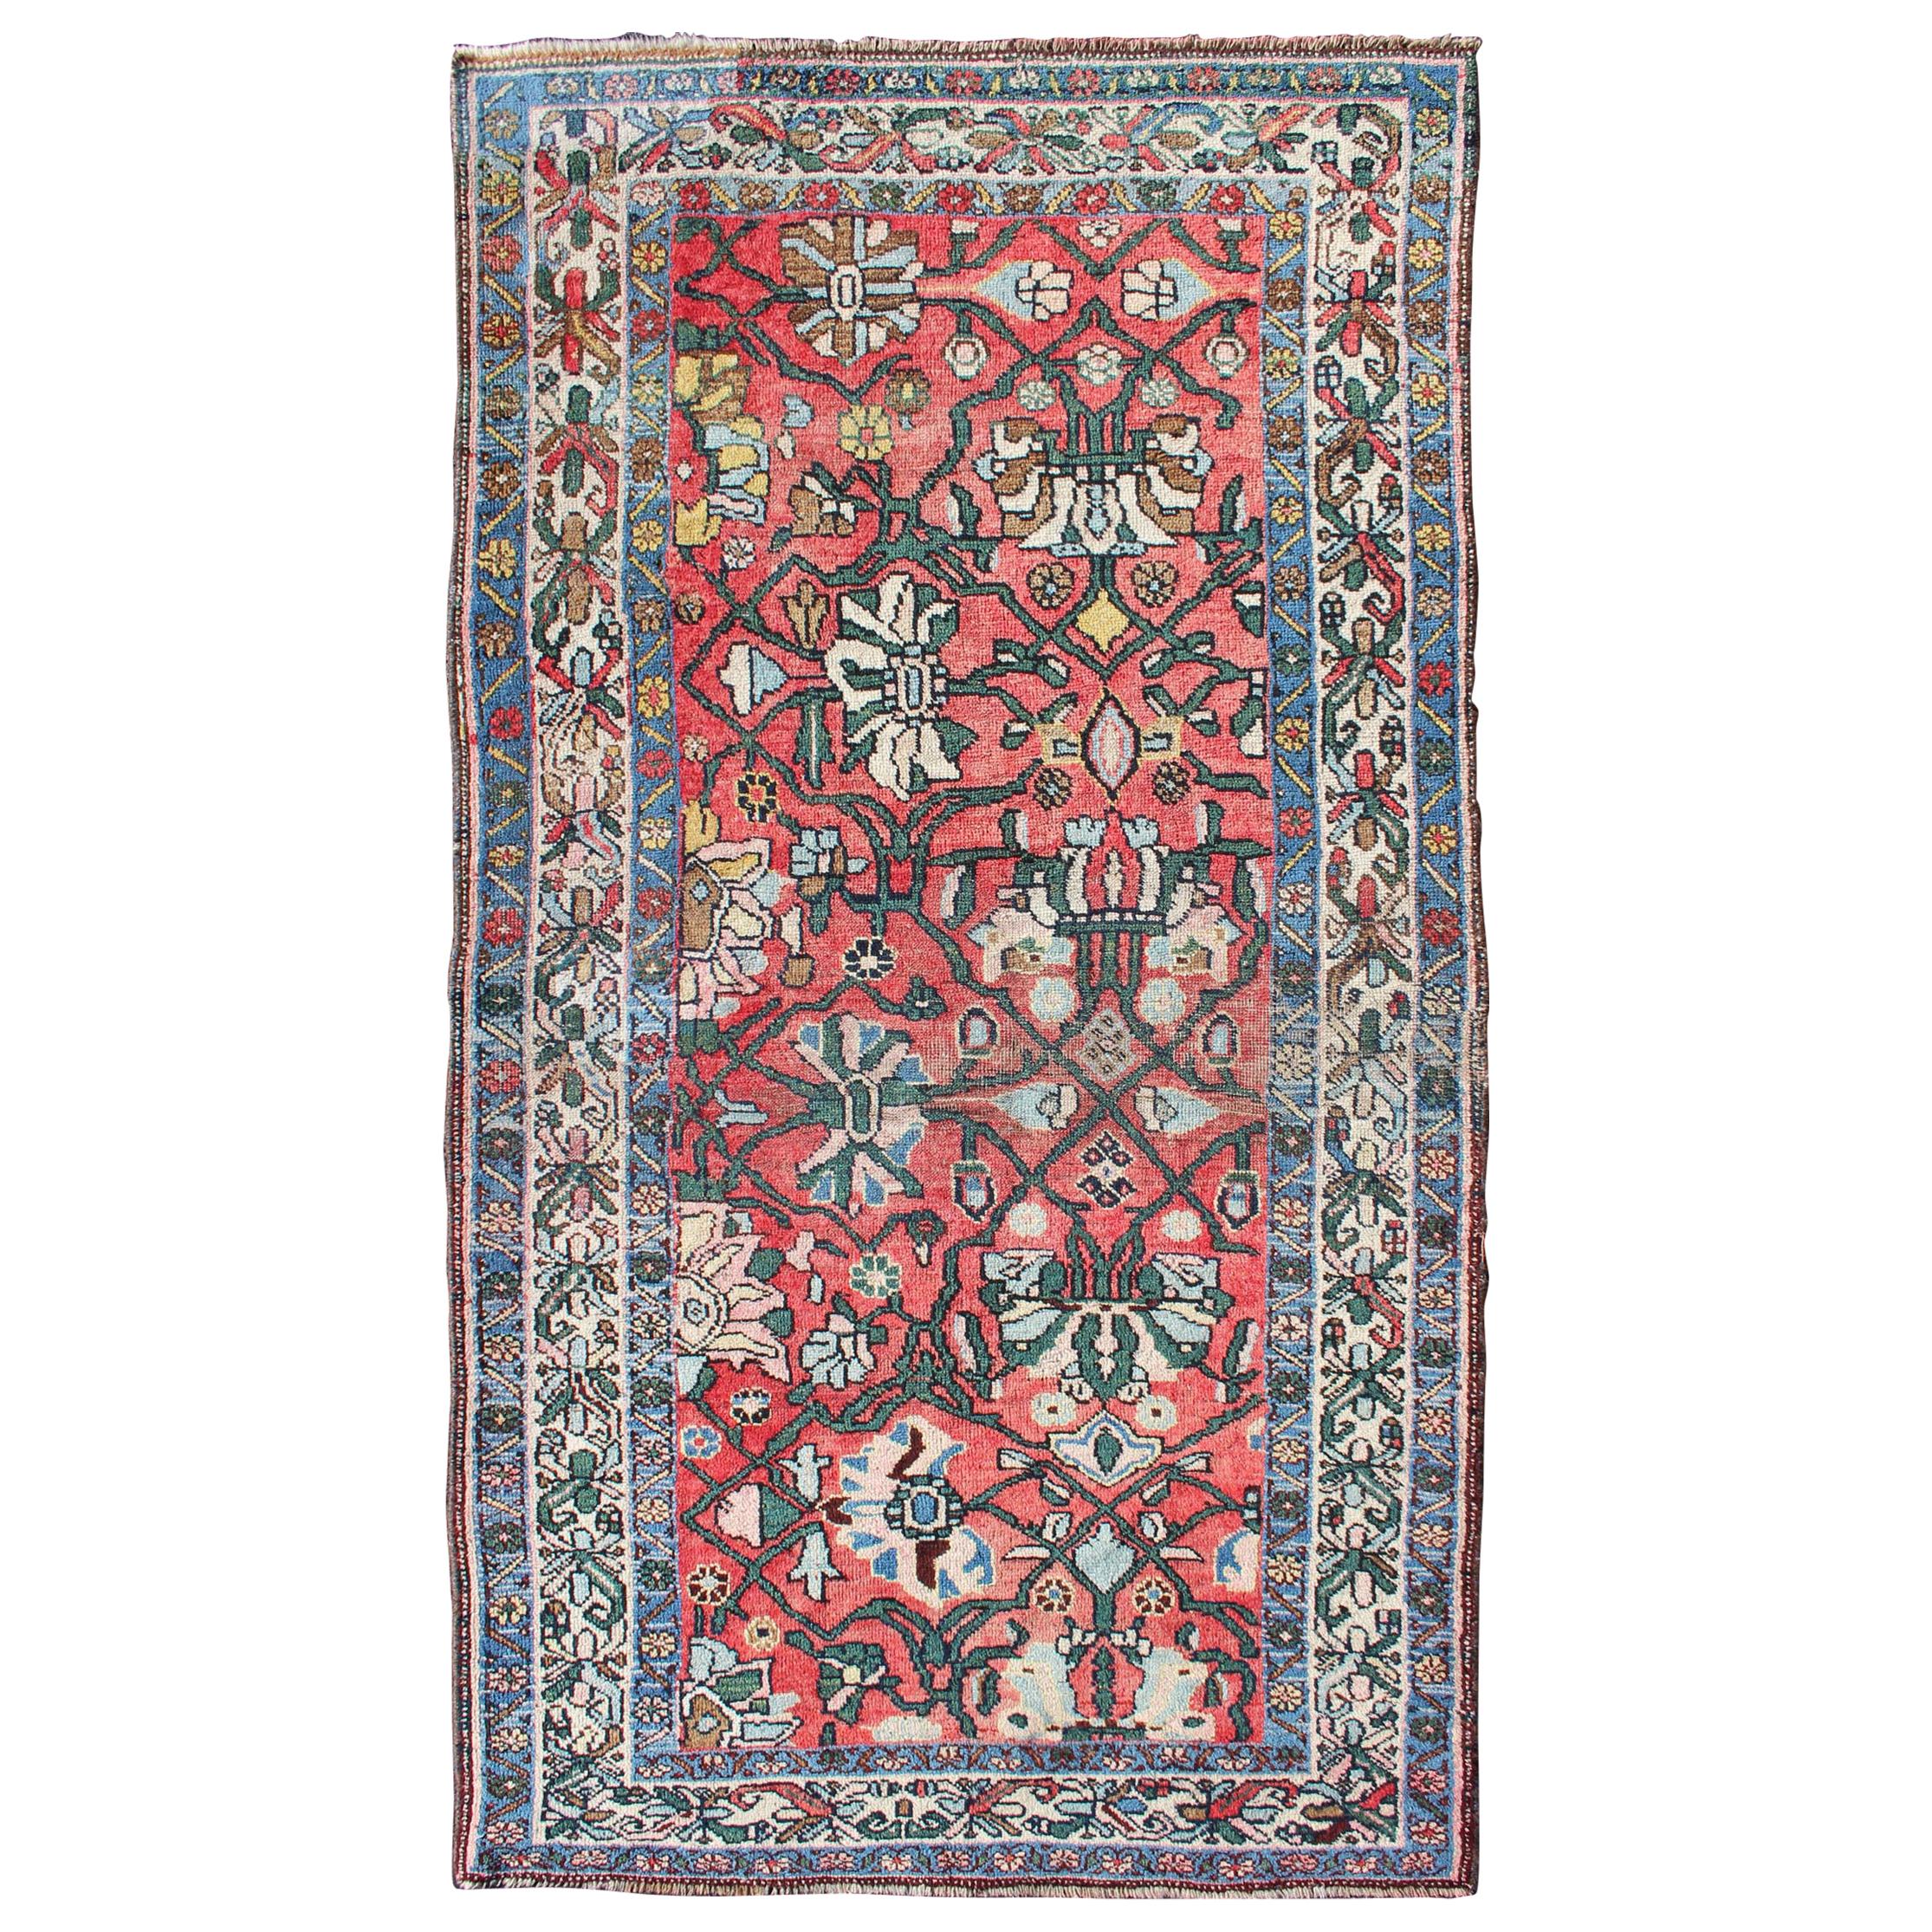 Antique Persian Bidjar Rug with Large Floral Motifs in Soft Red, Green & Blue